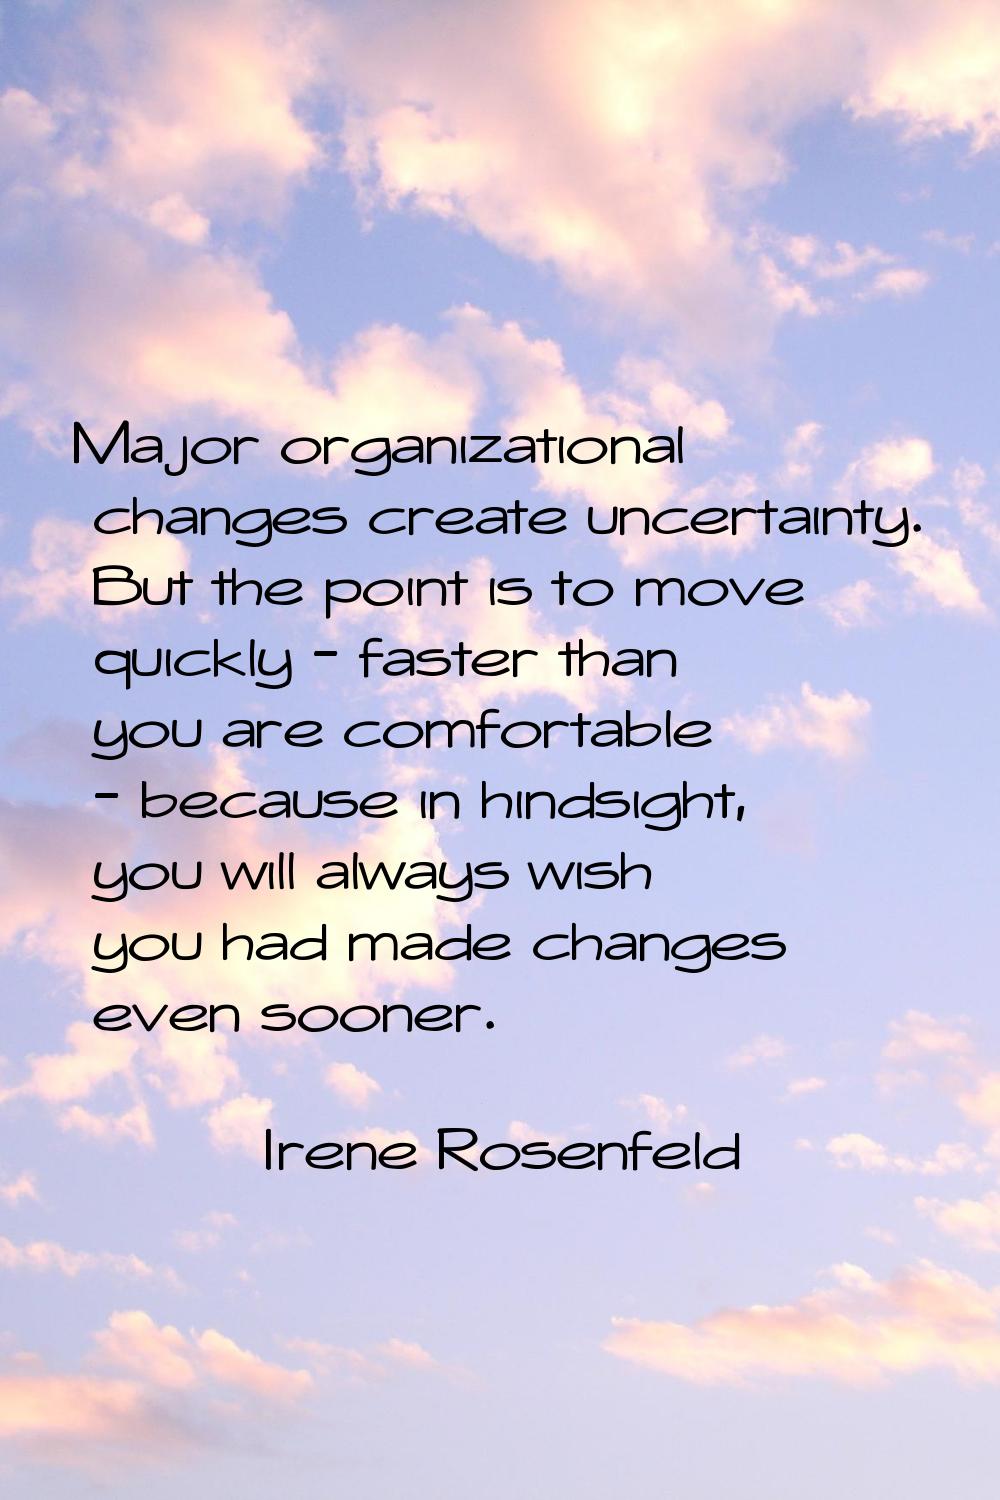 Major organizational changes create uncertainty. But the point is to move quickly - faster than you